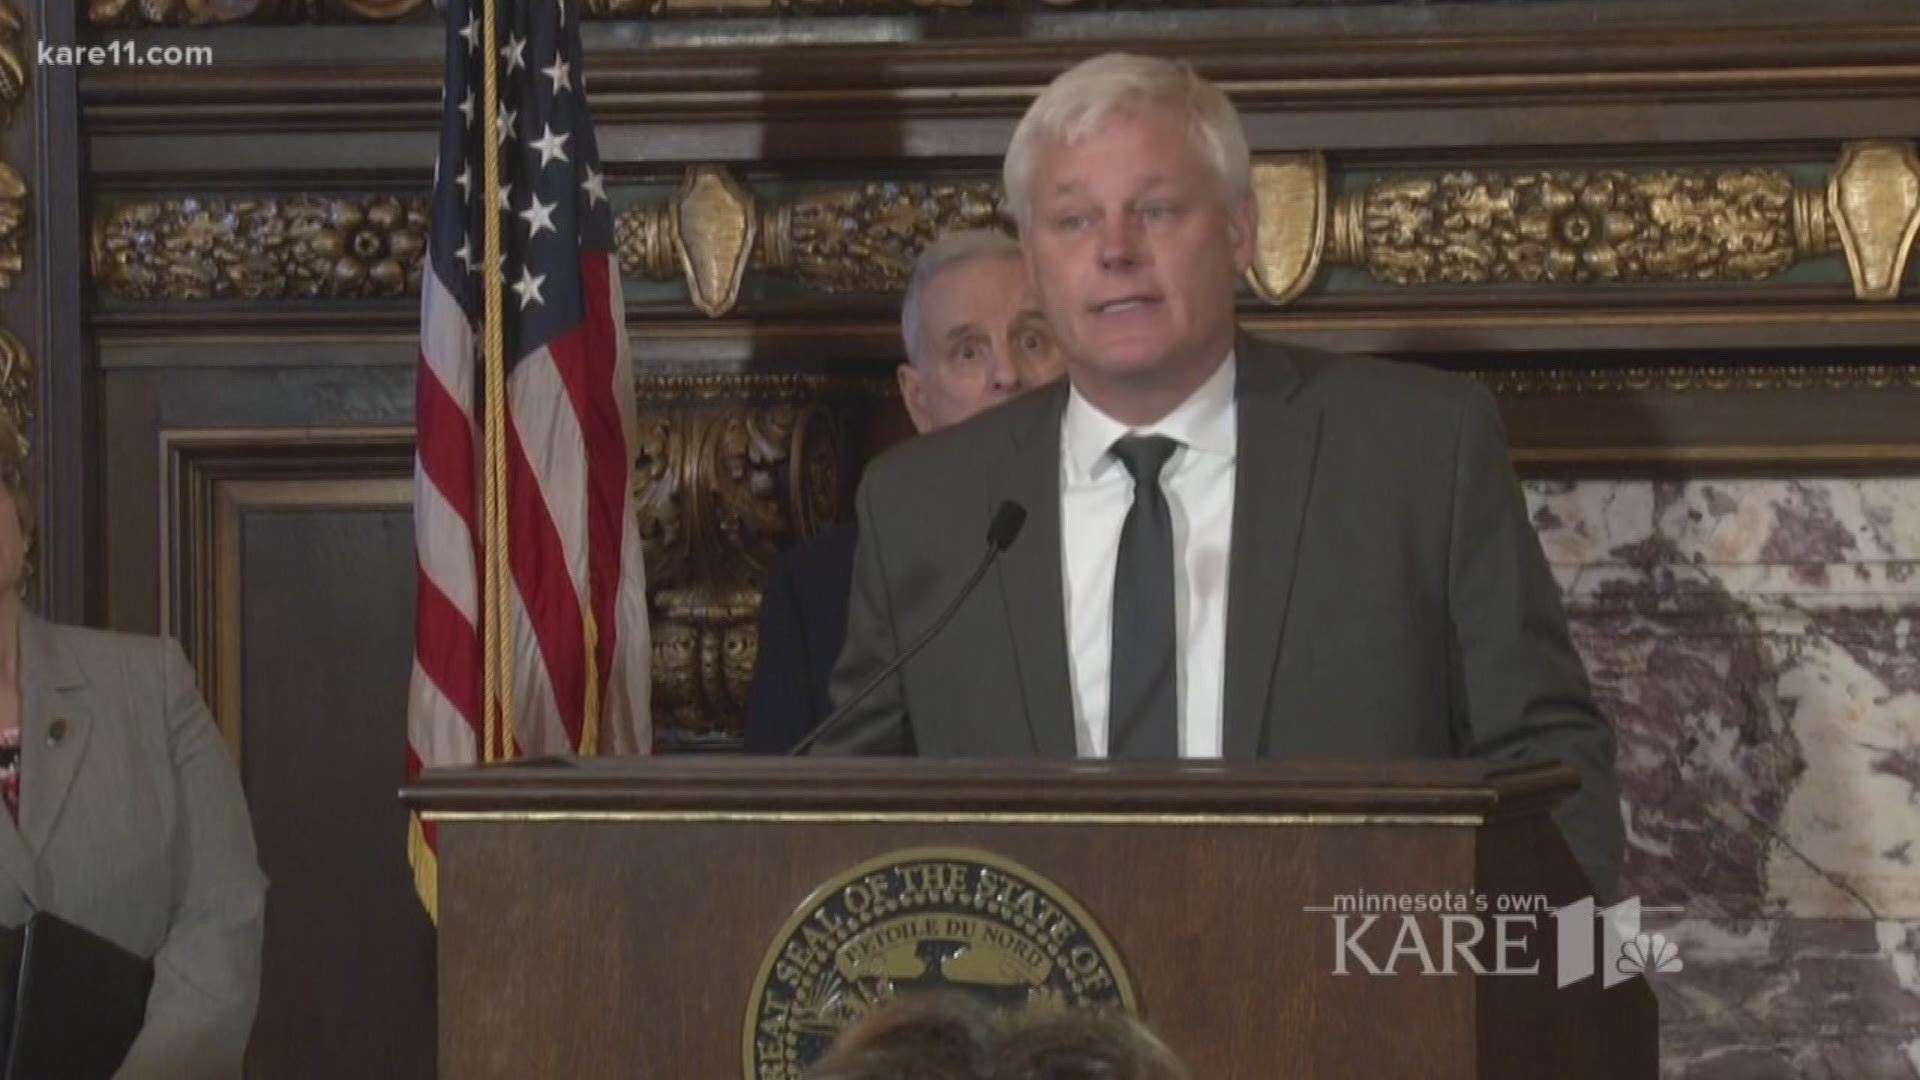 Gov. Mark Dayton Tuesday appointed Rep. Paul Thissen, a veteran DFL state lawmaker from Minneapolis and former Speaker of the House, to the Minnesota Supreme Court. Dayton appointees now occupy five of the seven seats on Minnesota's highest court.